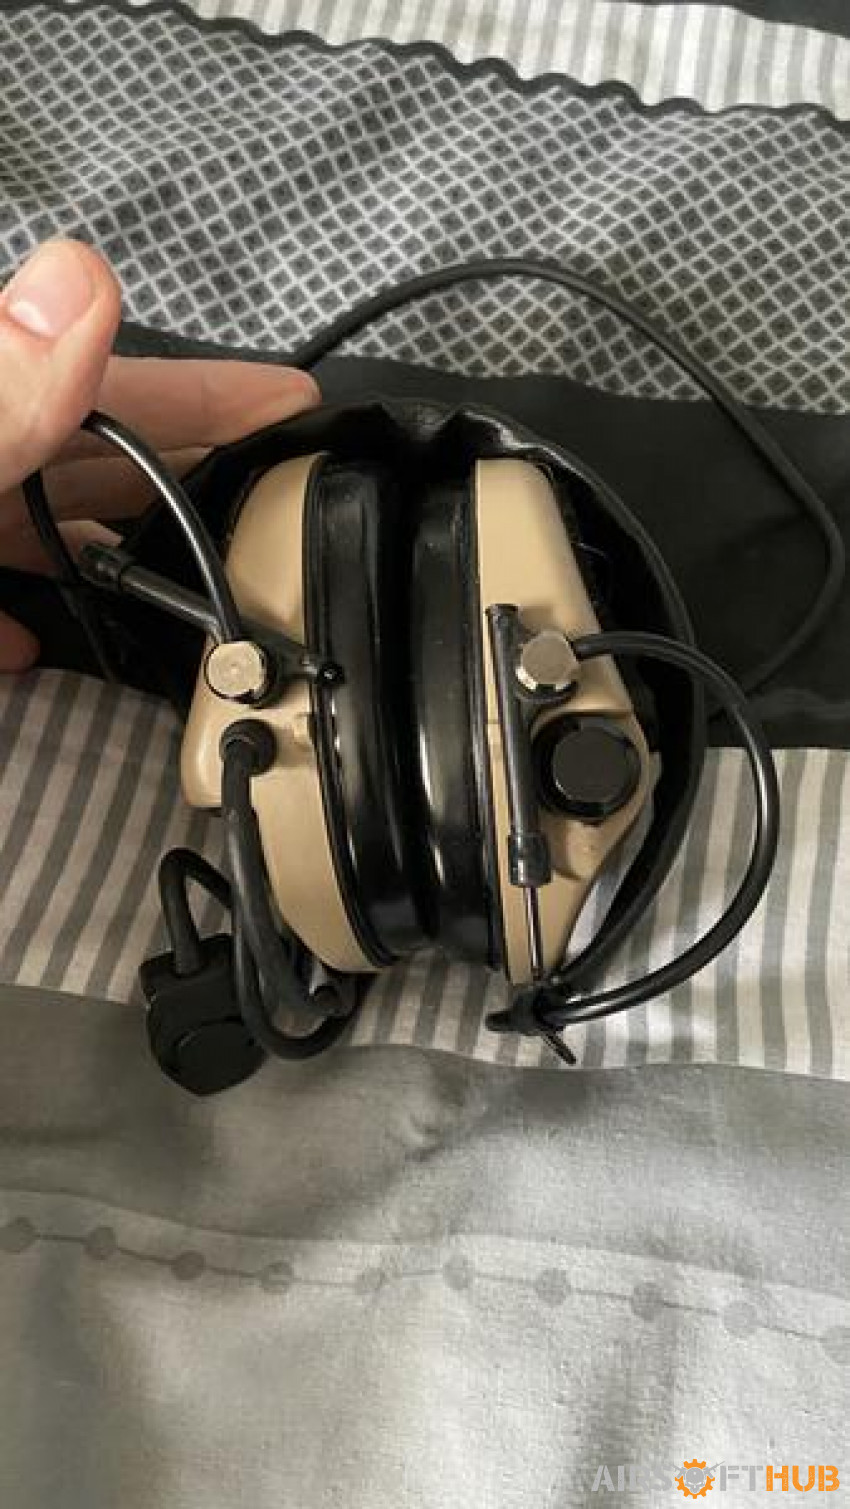 WADSN HEADSET - Used airsoft equipment